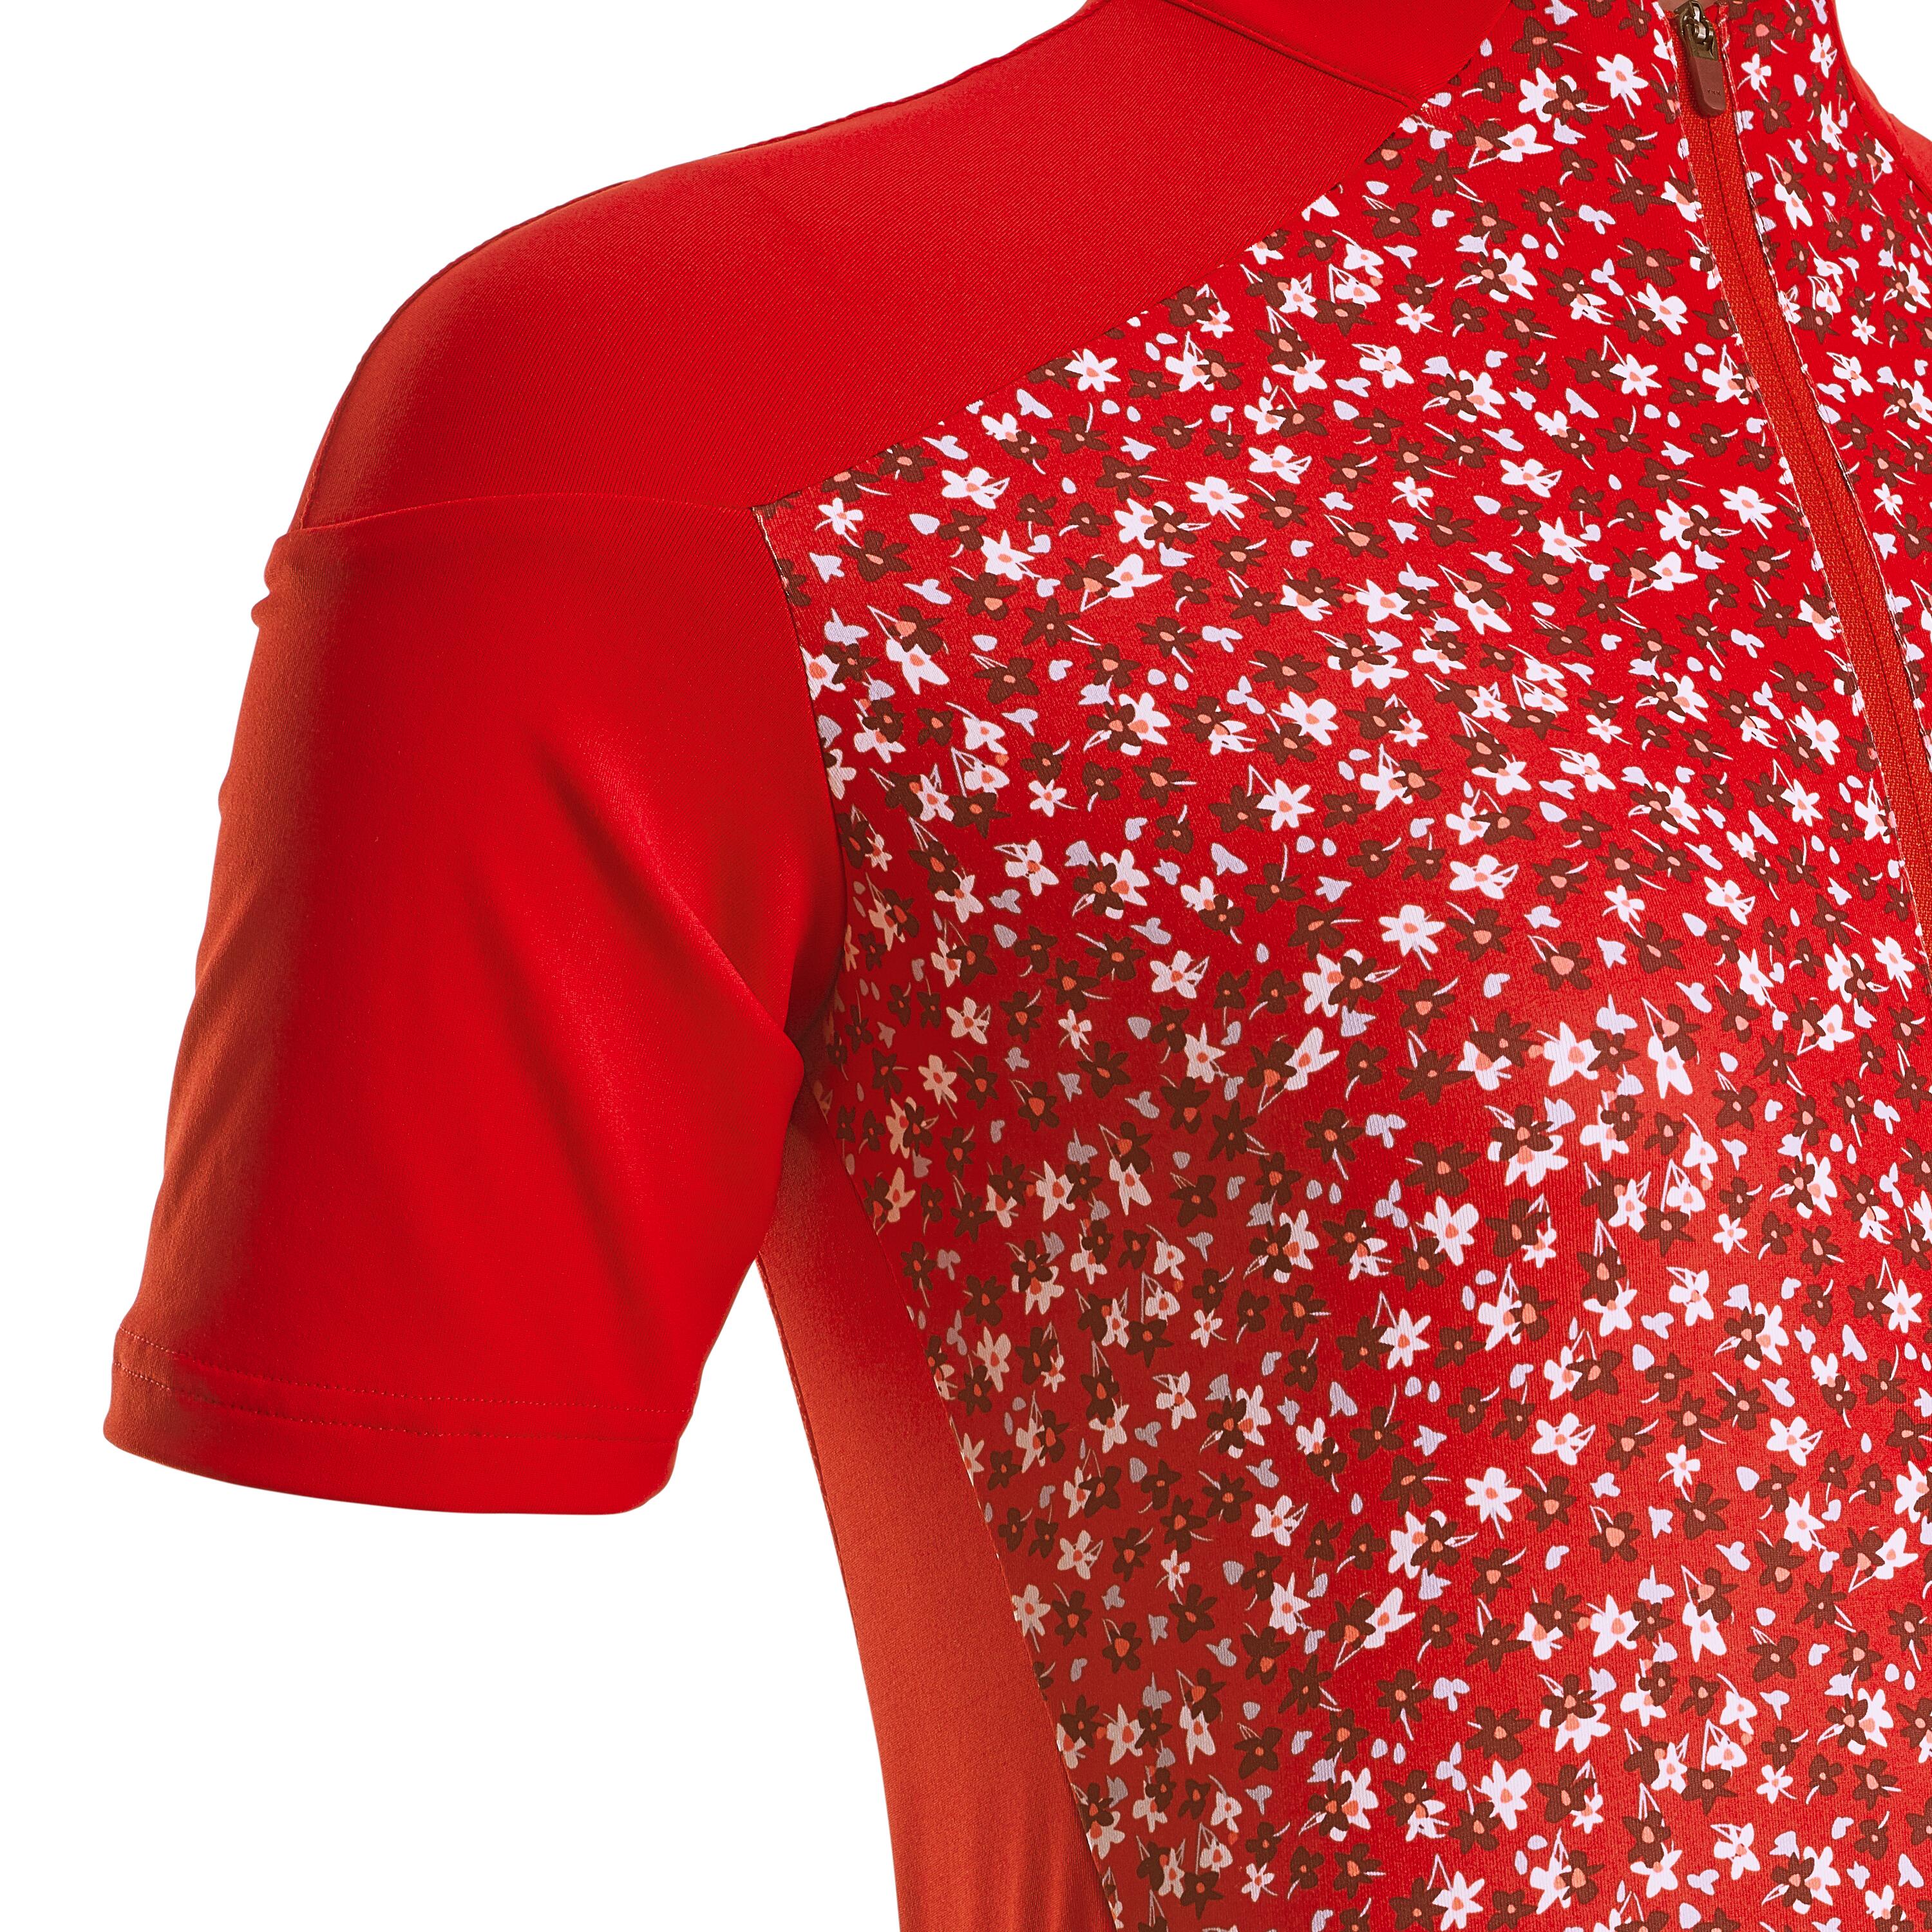 Women's Short-Sleeved Road Cycling Jersey RC500 - Floral/Red 4/7